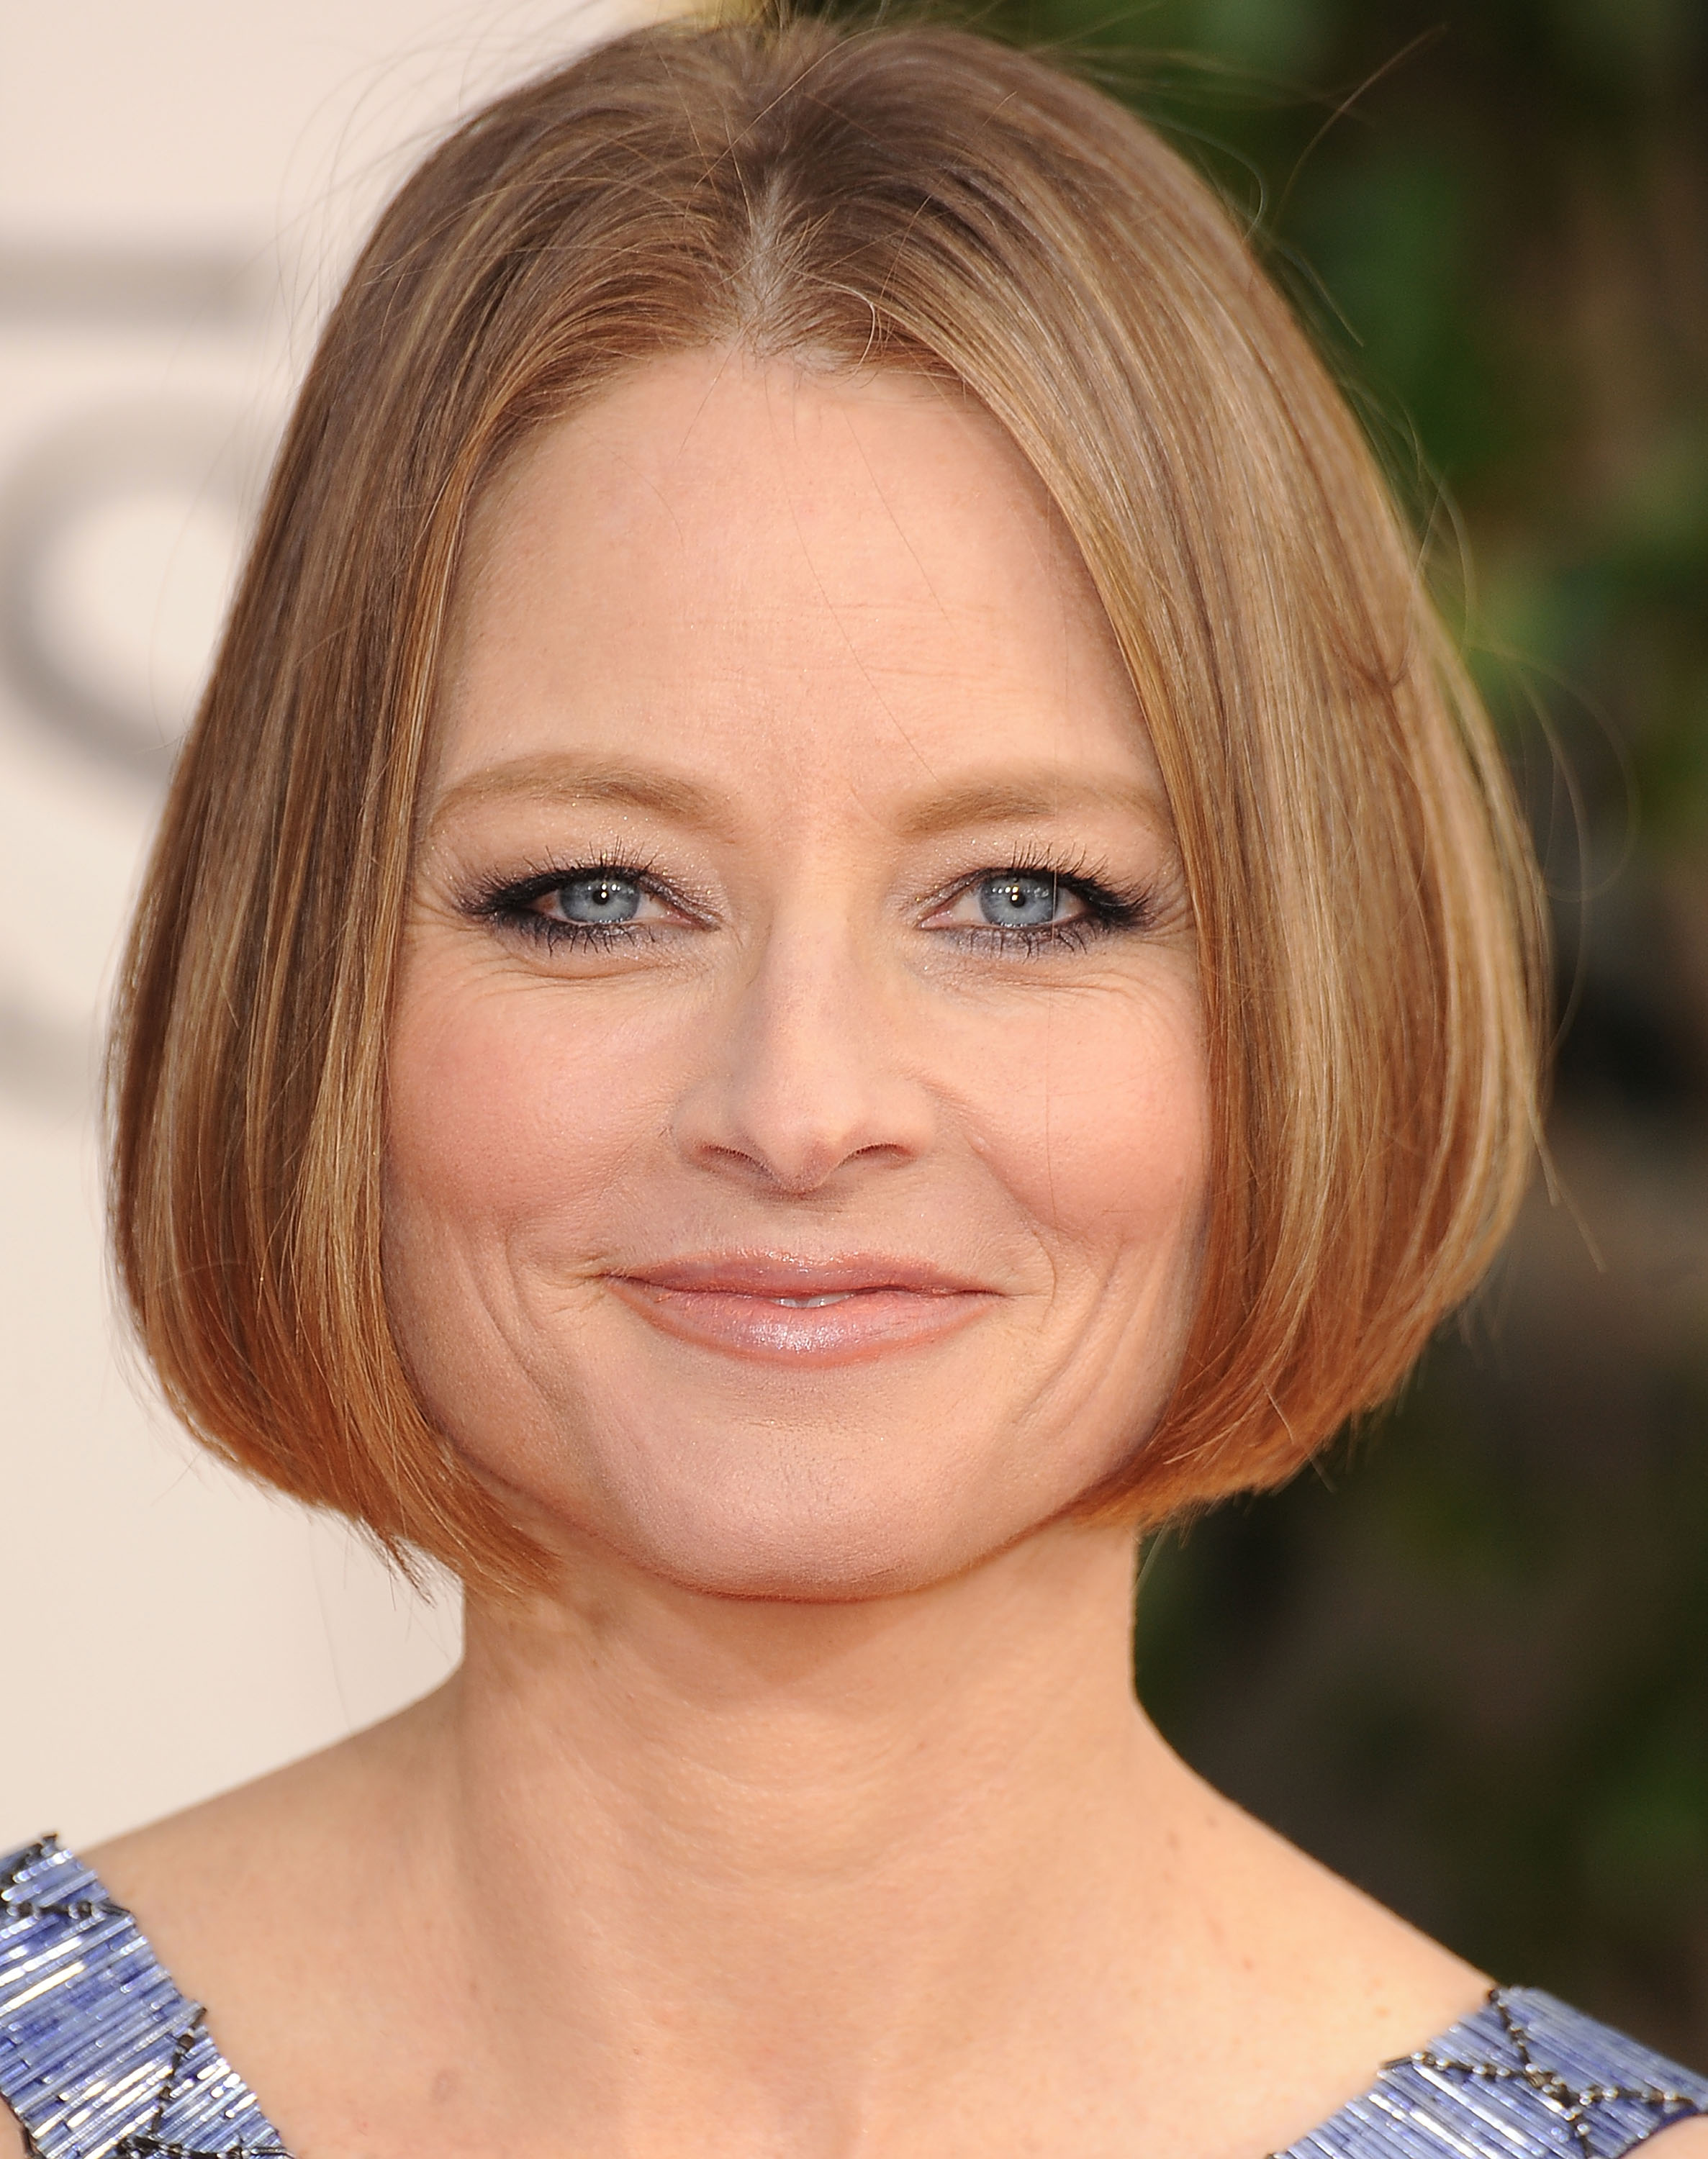 Jodie Foster arrives at the 70th Annual Golden Globe Awards at The Beverly Hilton Hotel on January 13, 2013 in Beverly Hills, California | Source: Getty Images